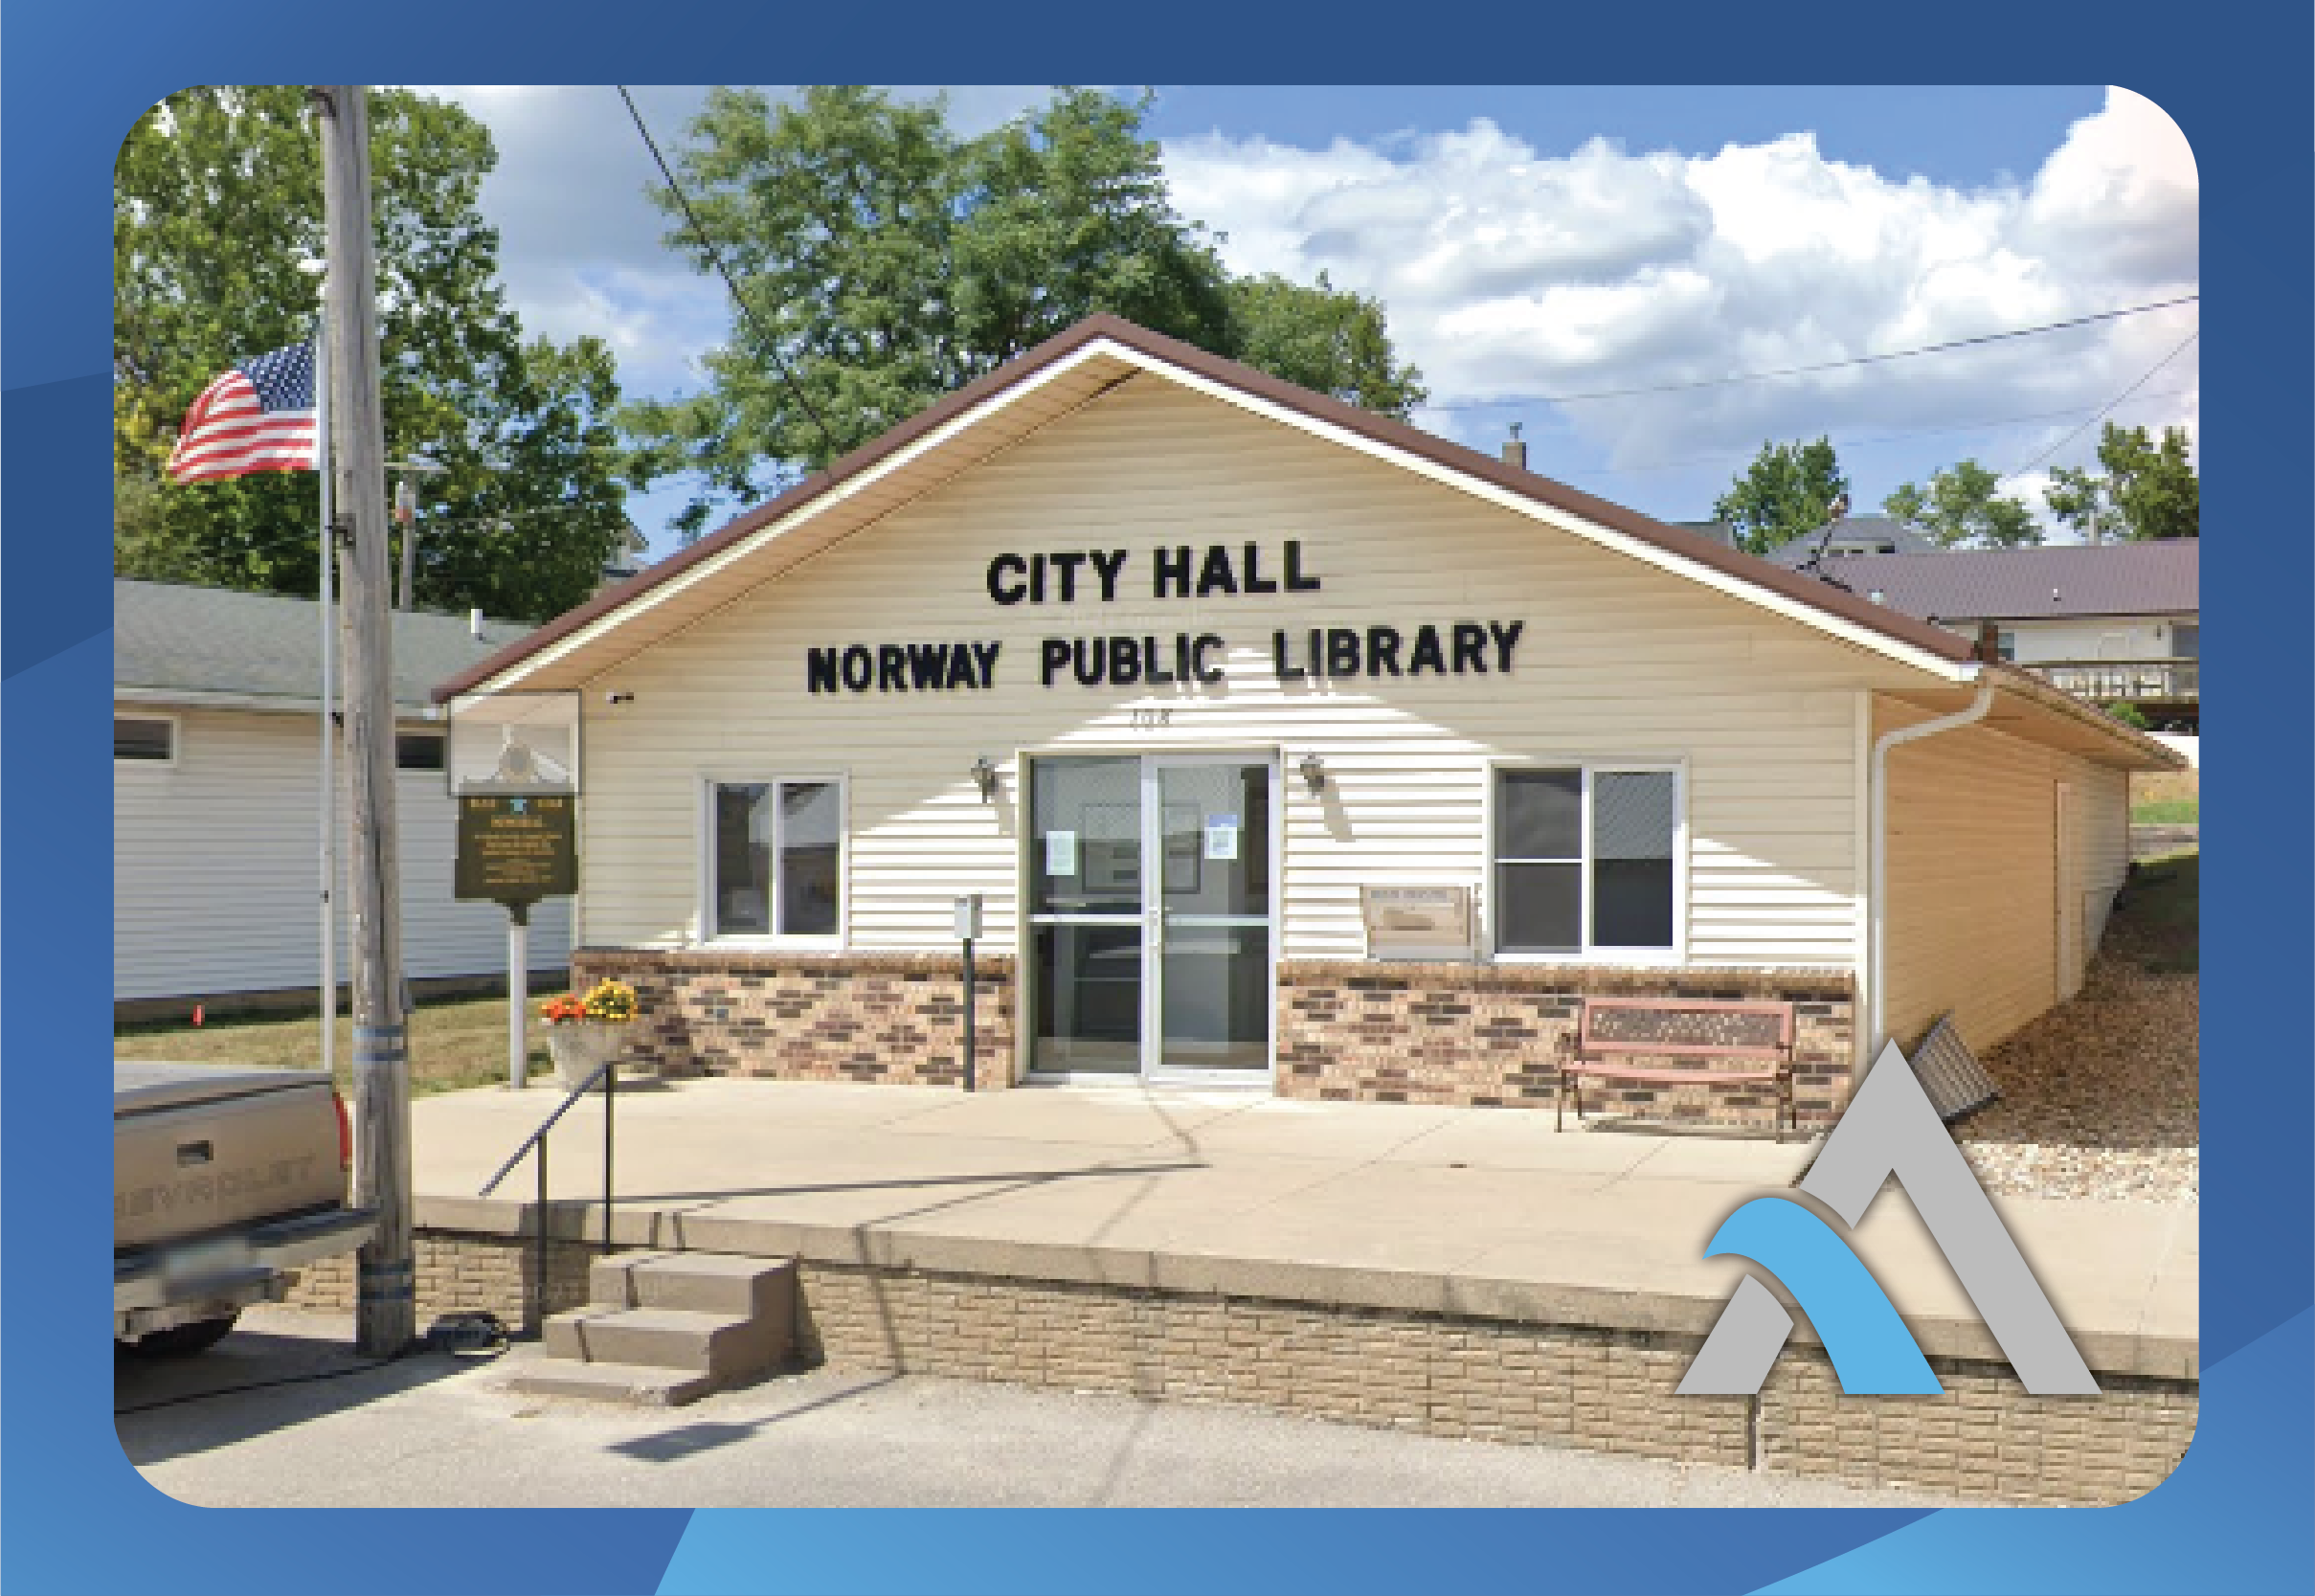 Rural and Small Libraries are the Foundation of American Libraries